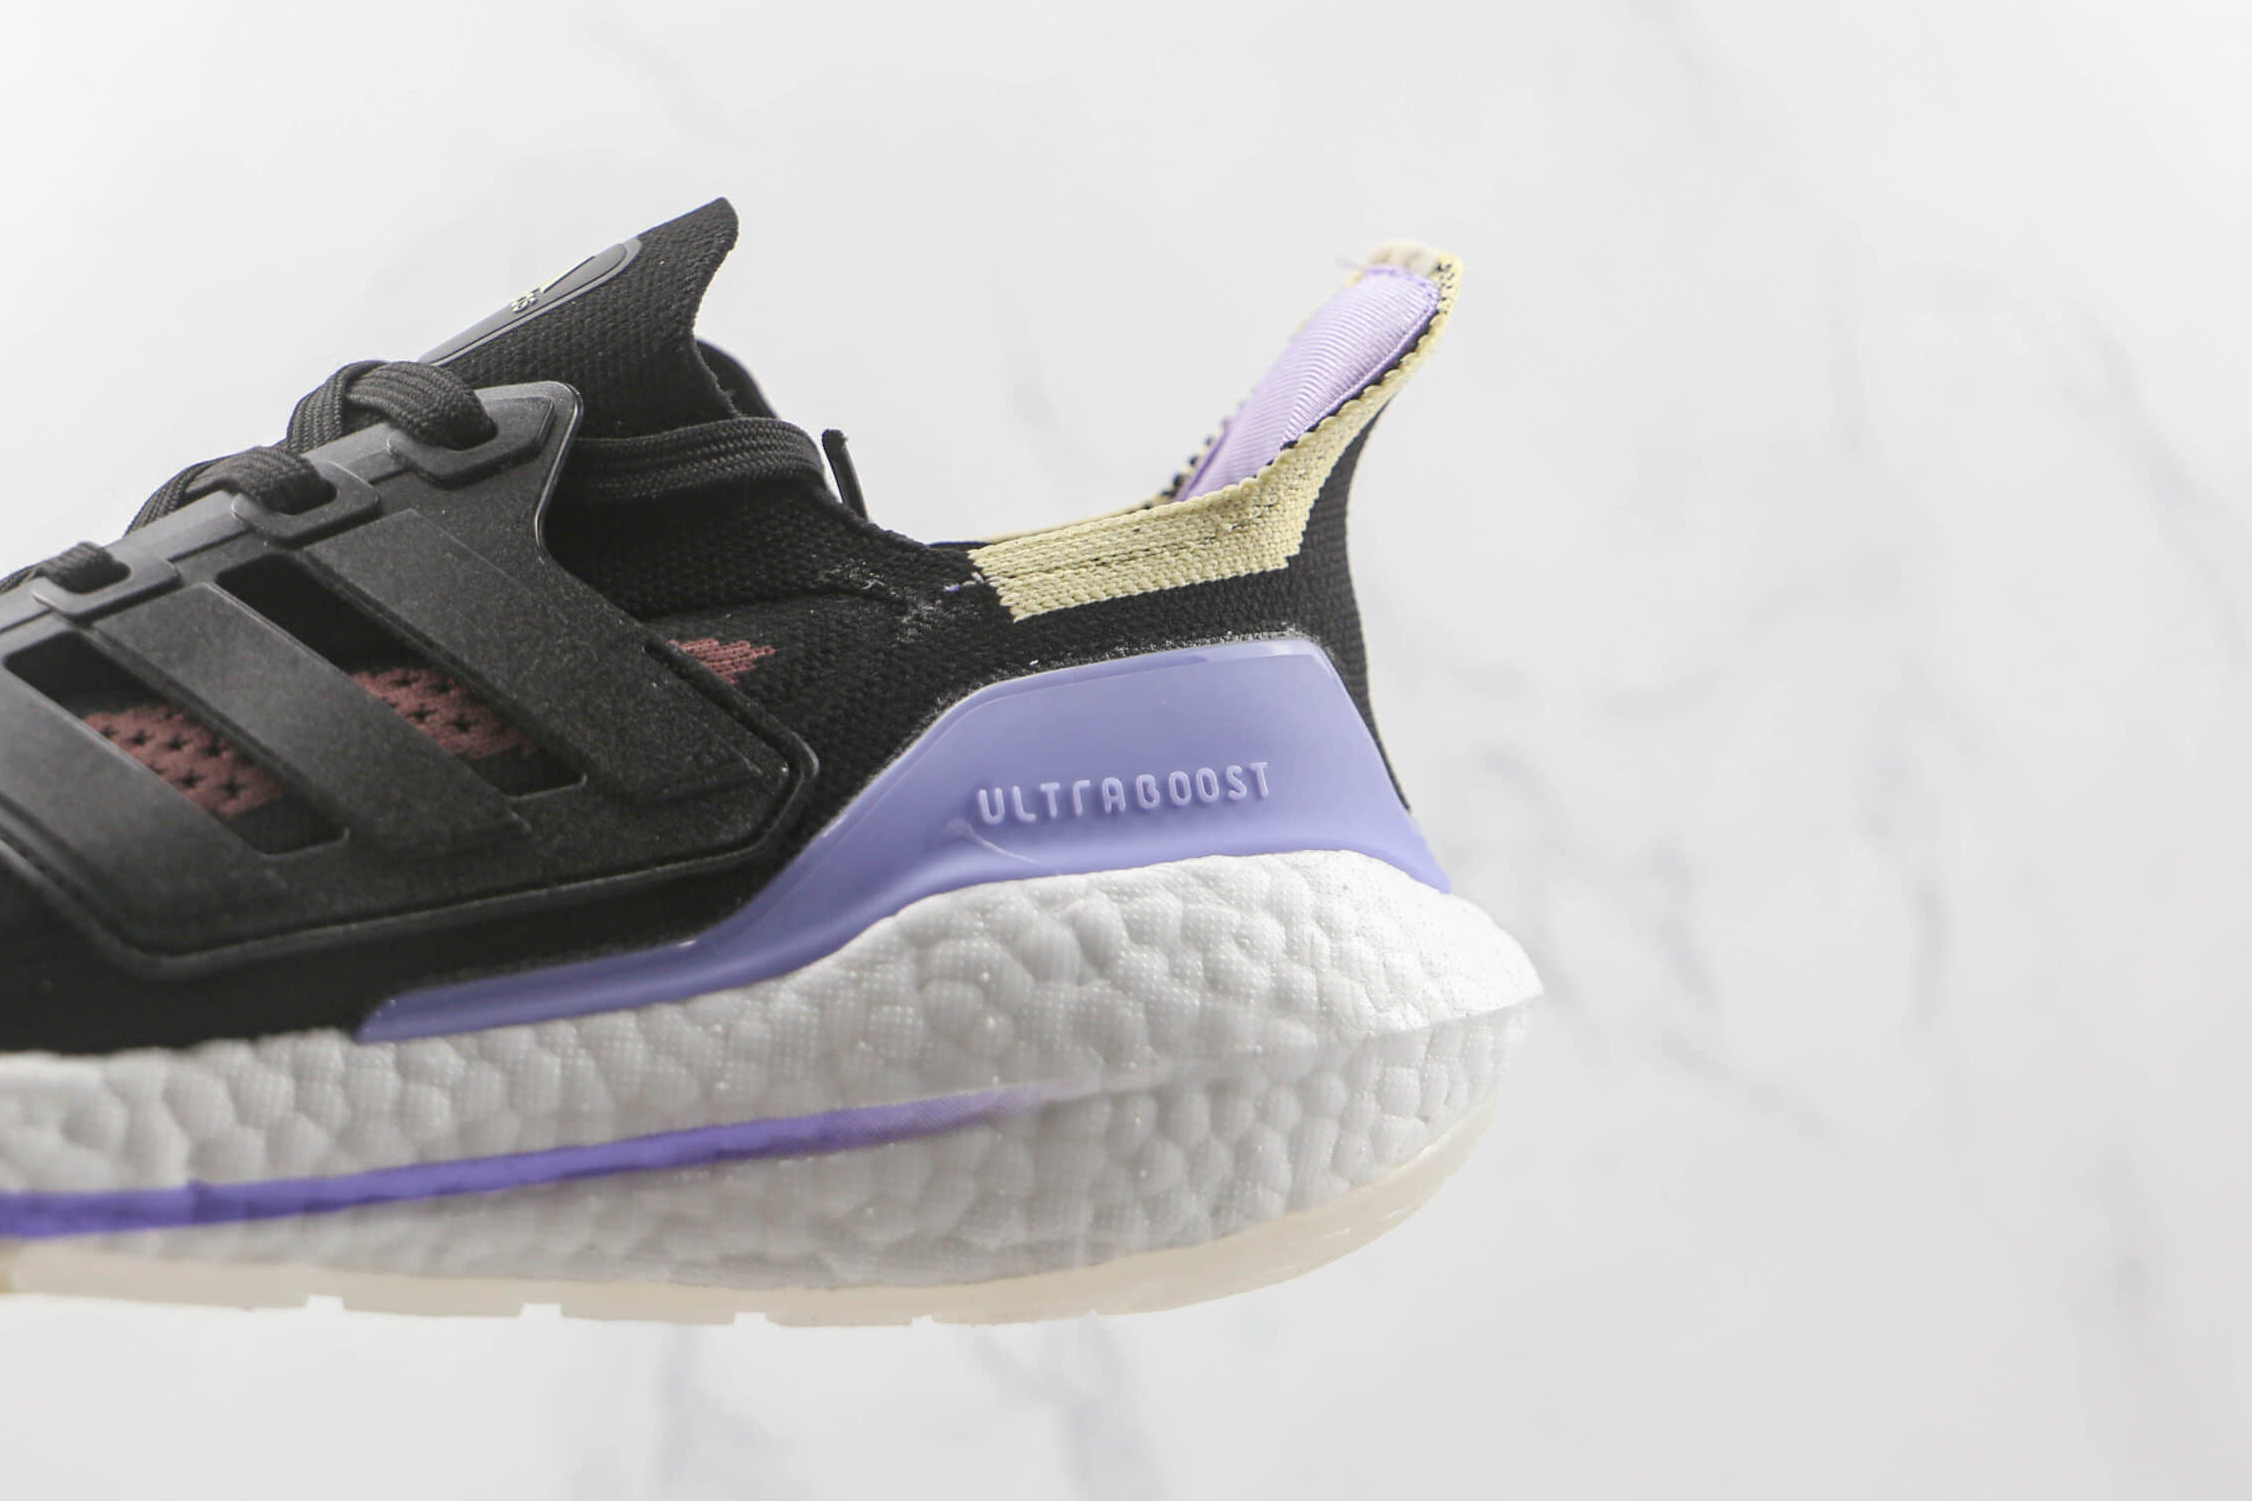 Adidas UltraBoost 21 Black Violet Tone S23841 - Latest Release for Ultimate Performance